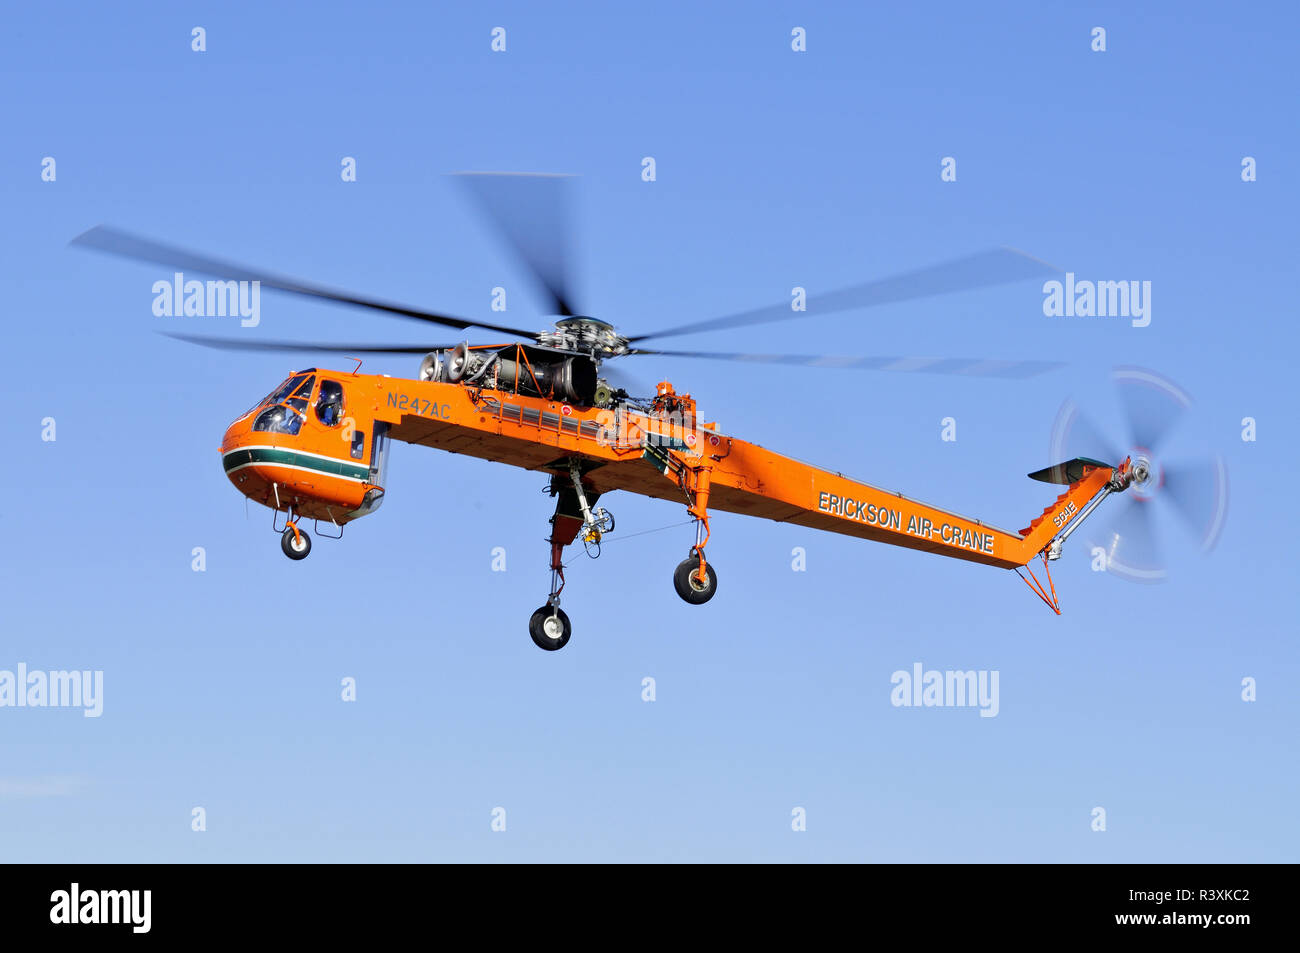 Erickson Sikorsky Twin engined Air Sky Crane Skylift hélicoptère. Banque D'Images